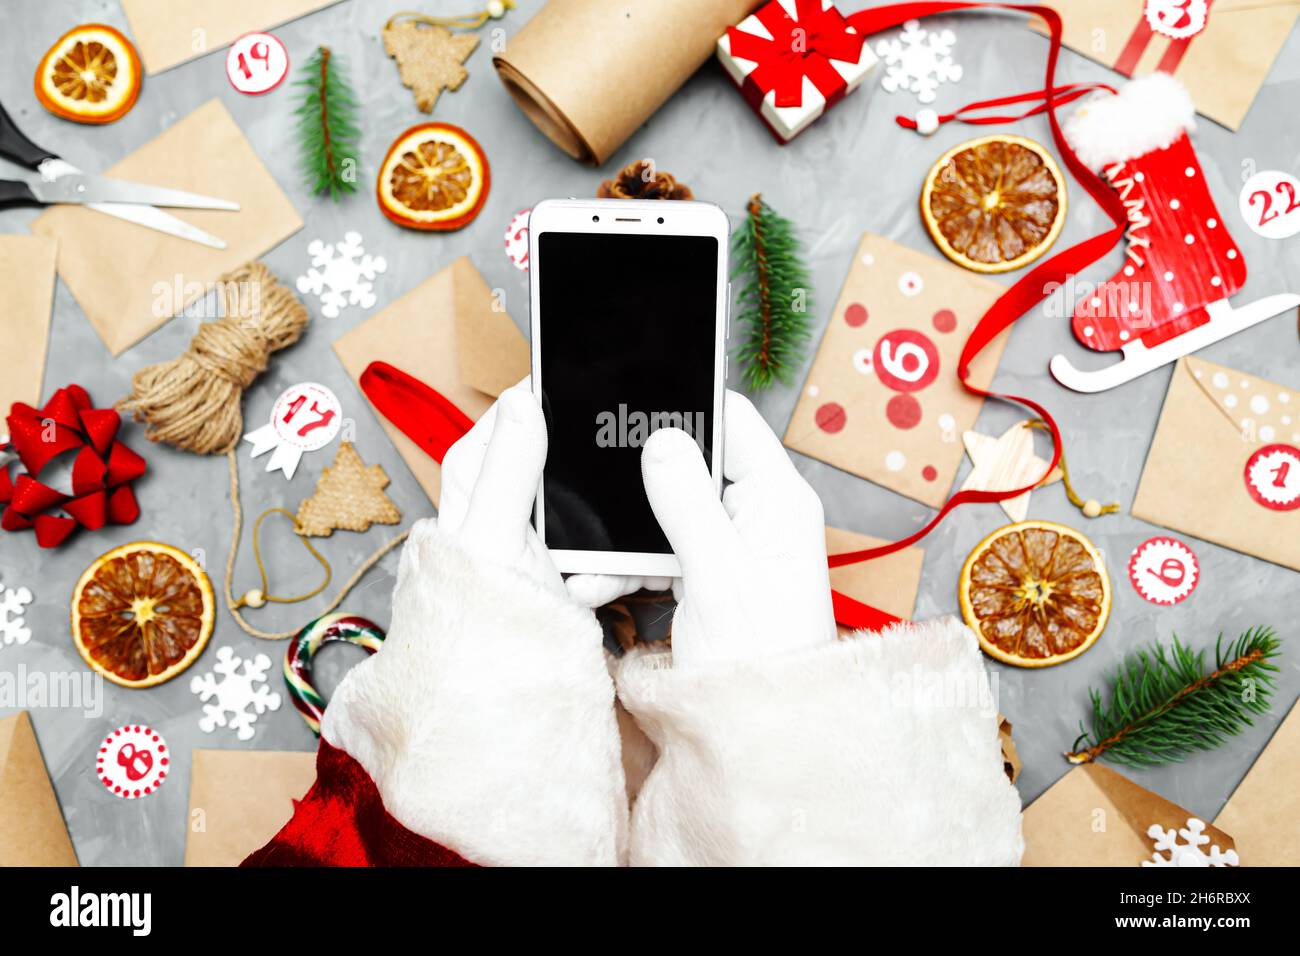 Hands of Santa Claus with a phone. Preparing the Advent Calendar.  Seasonal Christmas tradition. Flat lay, top view. Stock Photo